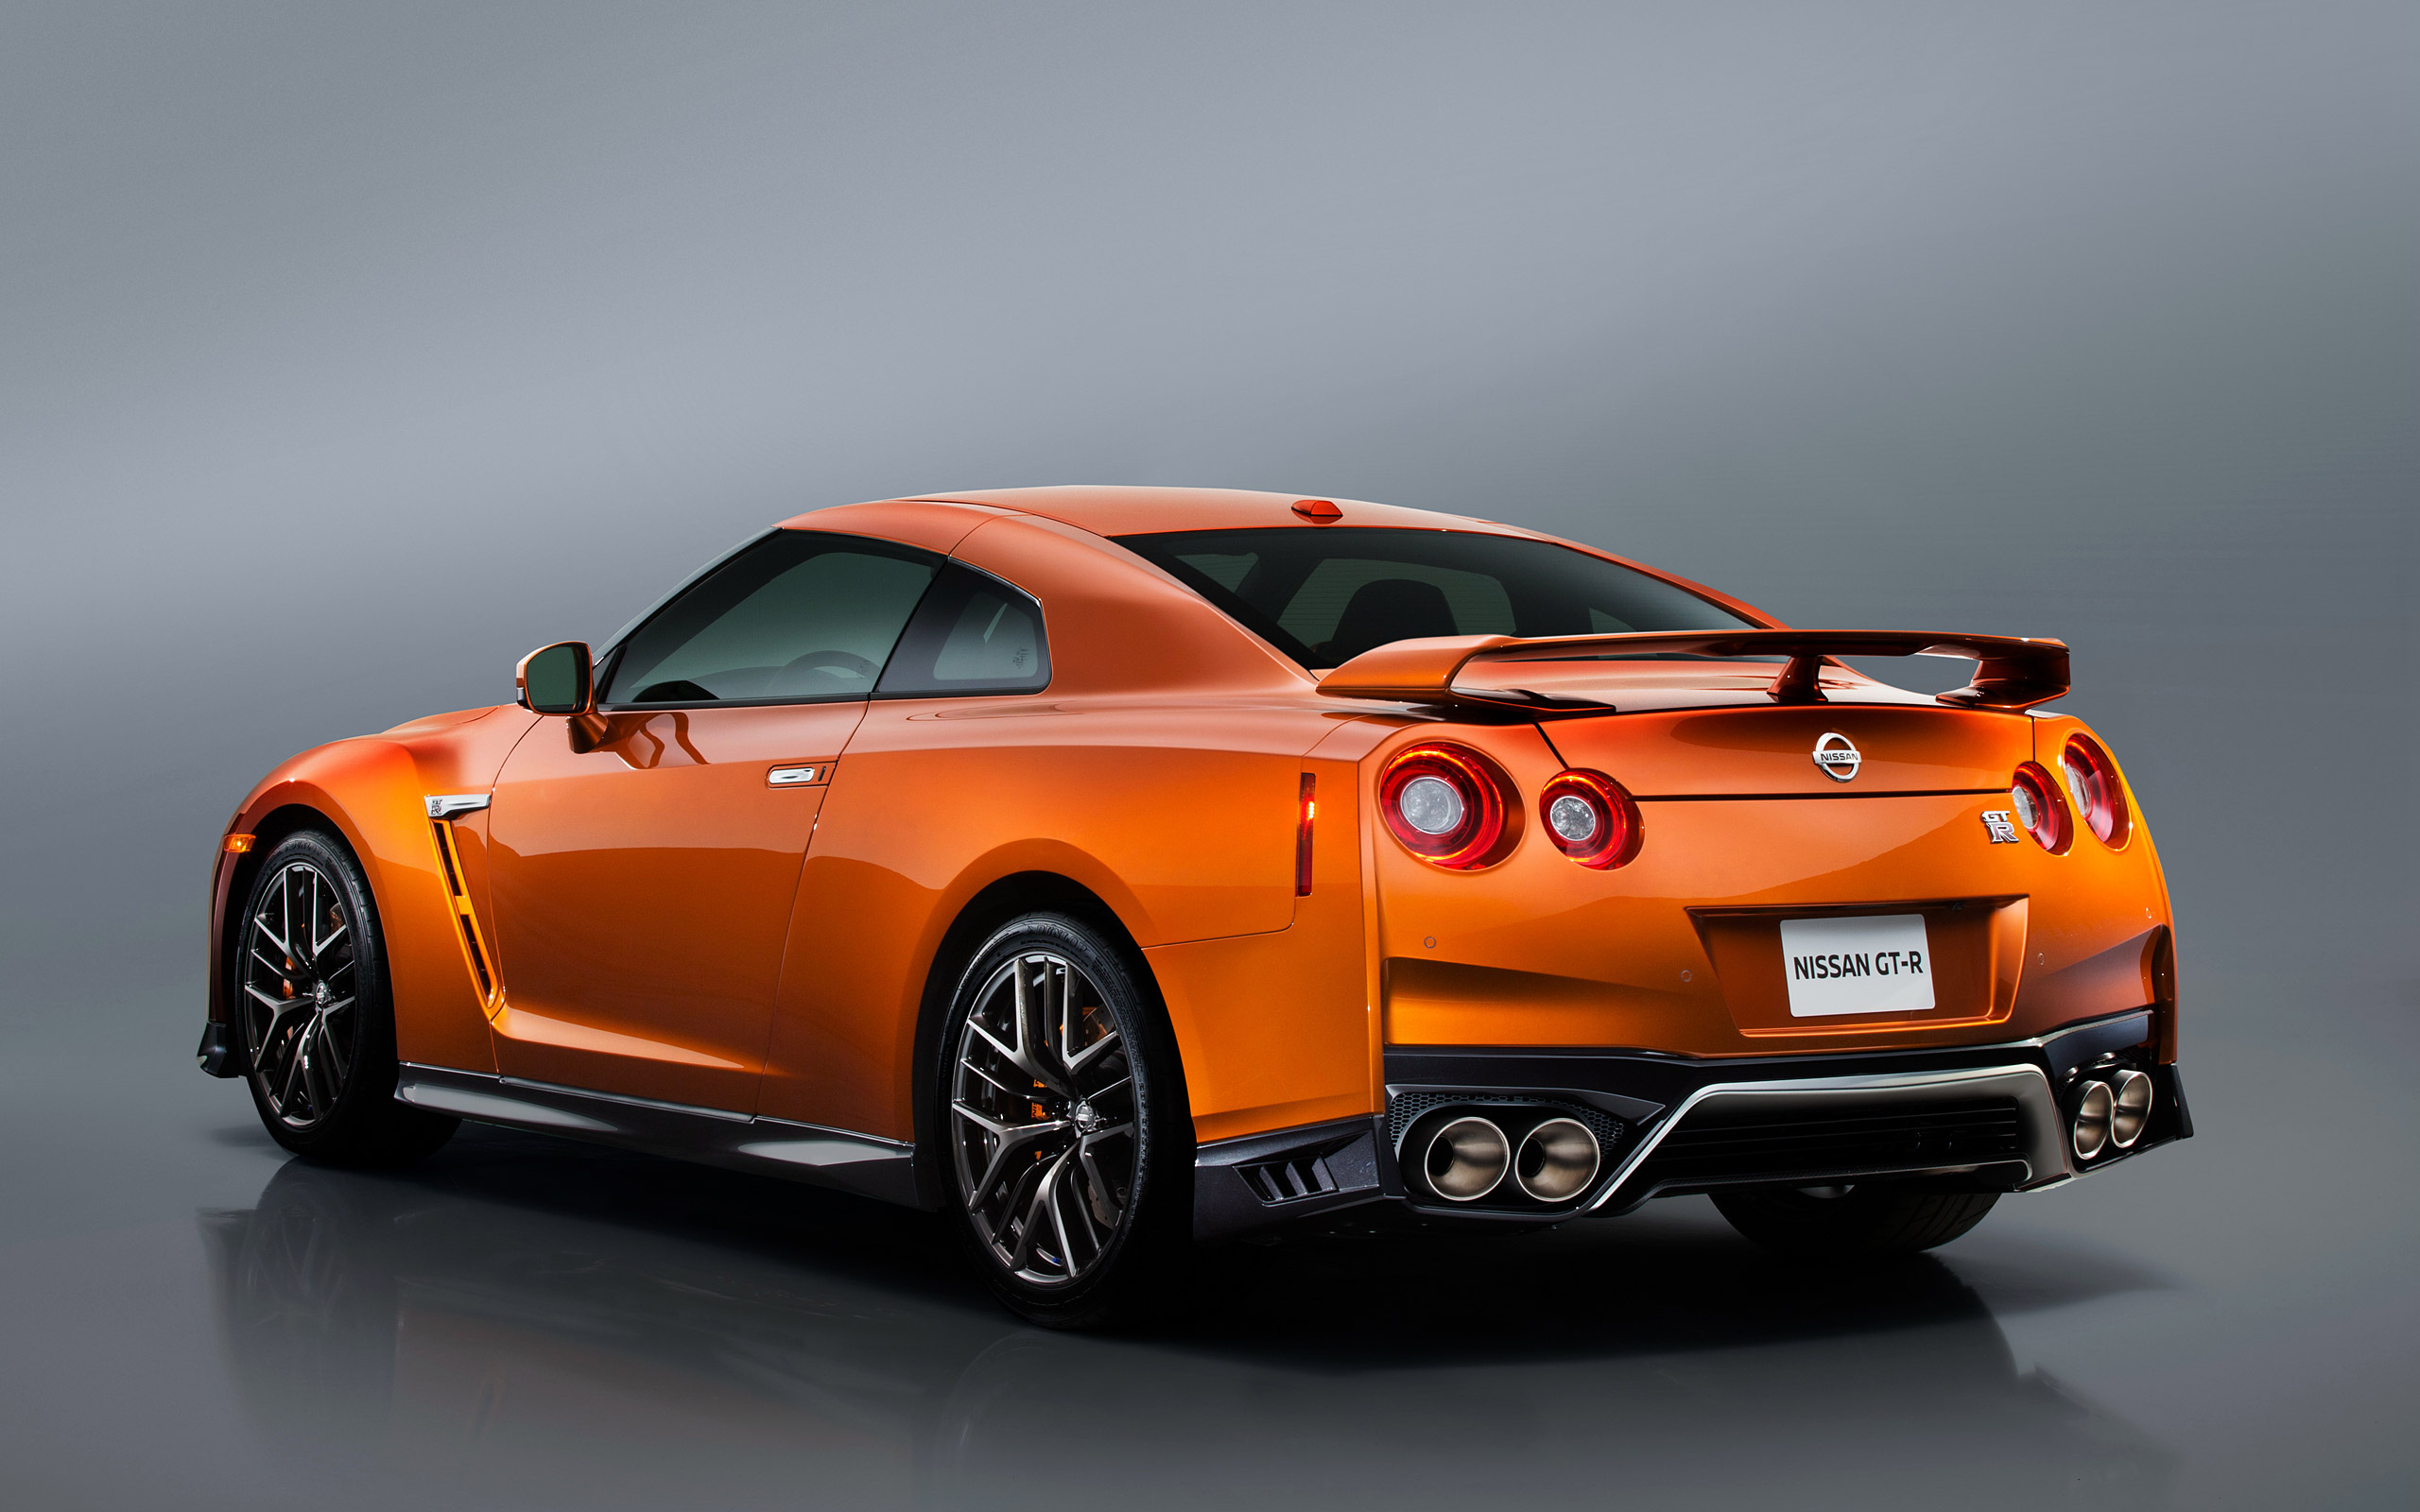 General 2560x1600 Nissan GT-R car vehicle simple background reflection orange cars Nissan gray background Japanese cars rear view licence plates minimalism